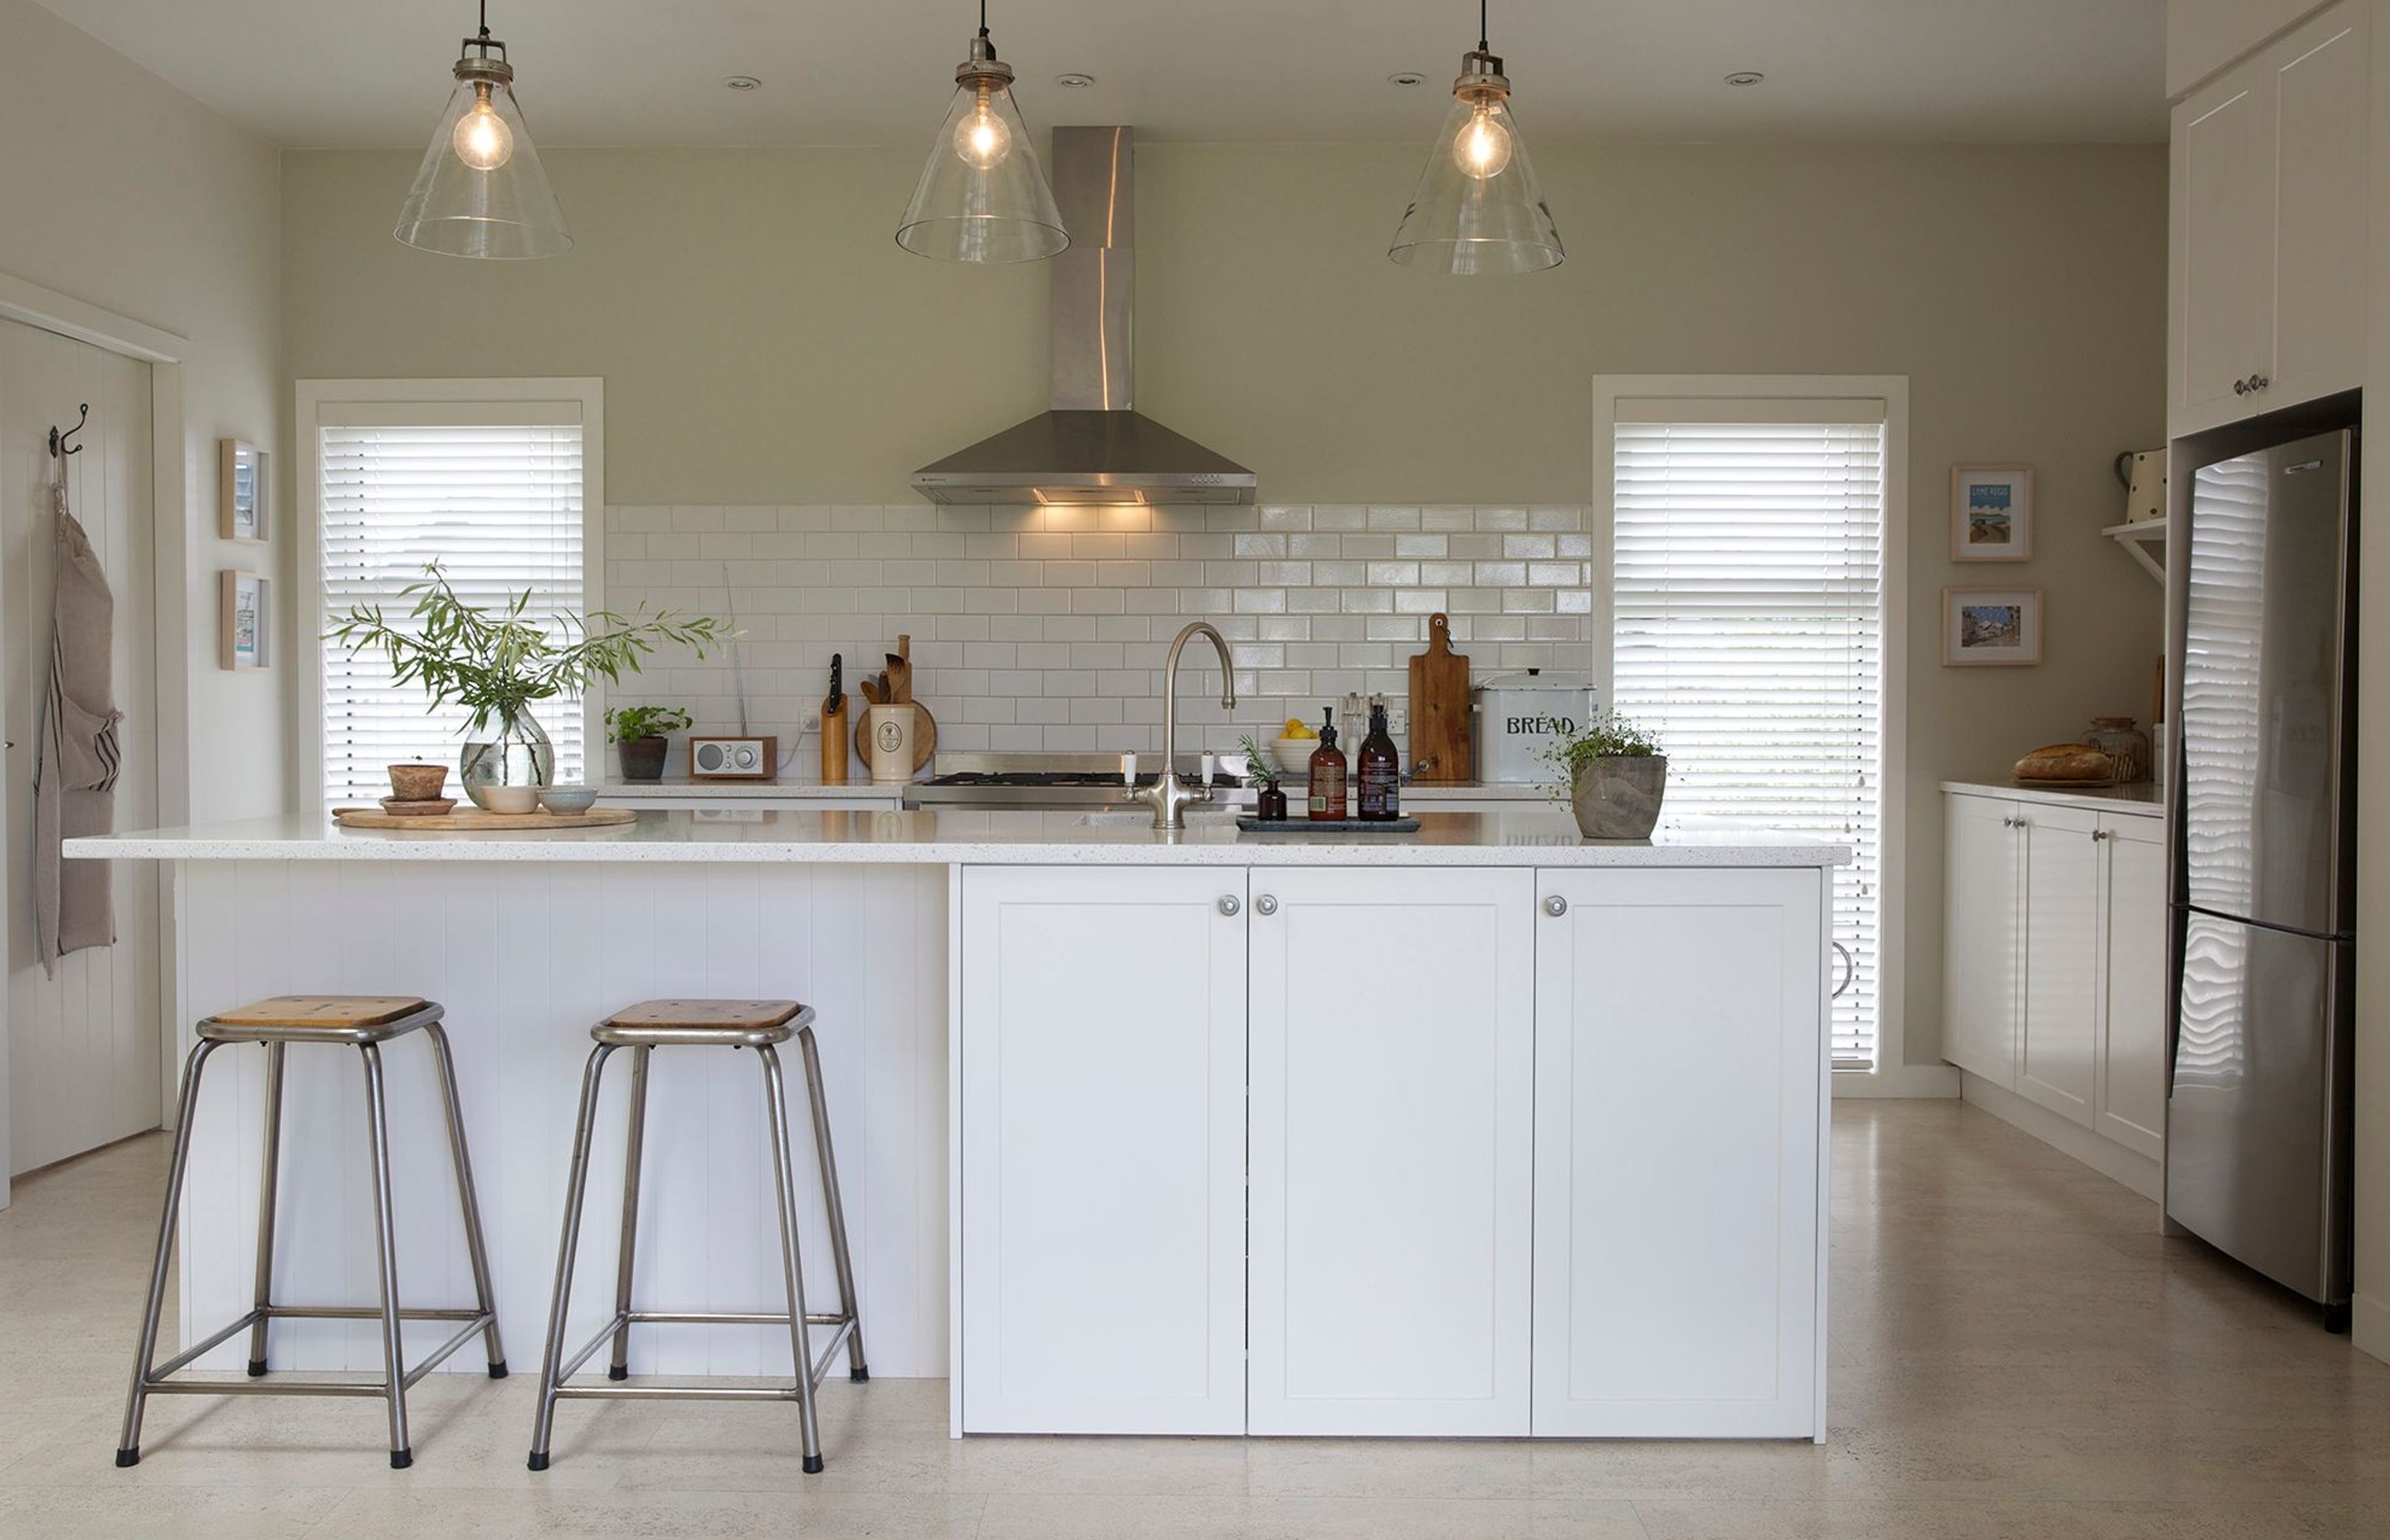 In true farmhouse style, this timeless kitchen is super functional with a large island, laid out for easy access with lots of low cupboards and the laundry situated behind the door on the left.